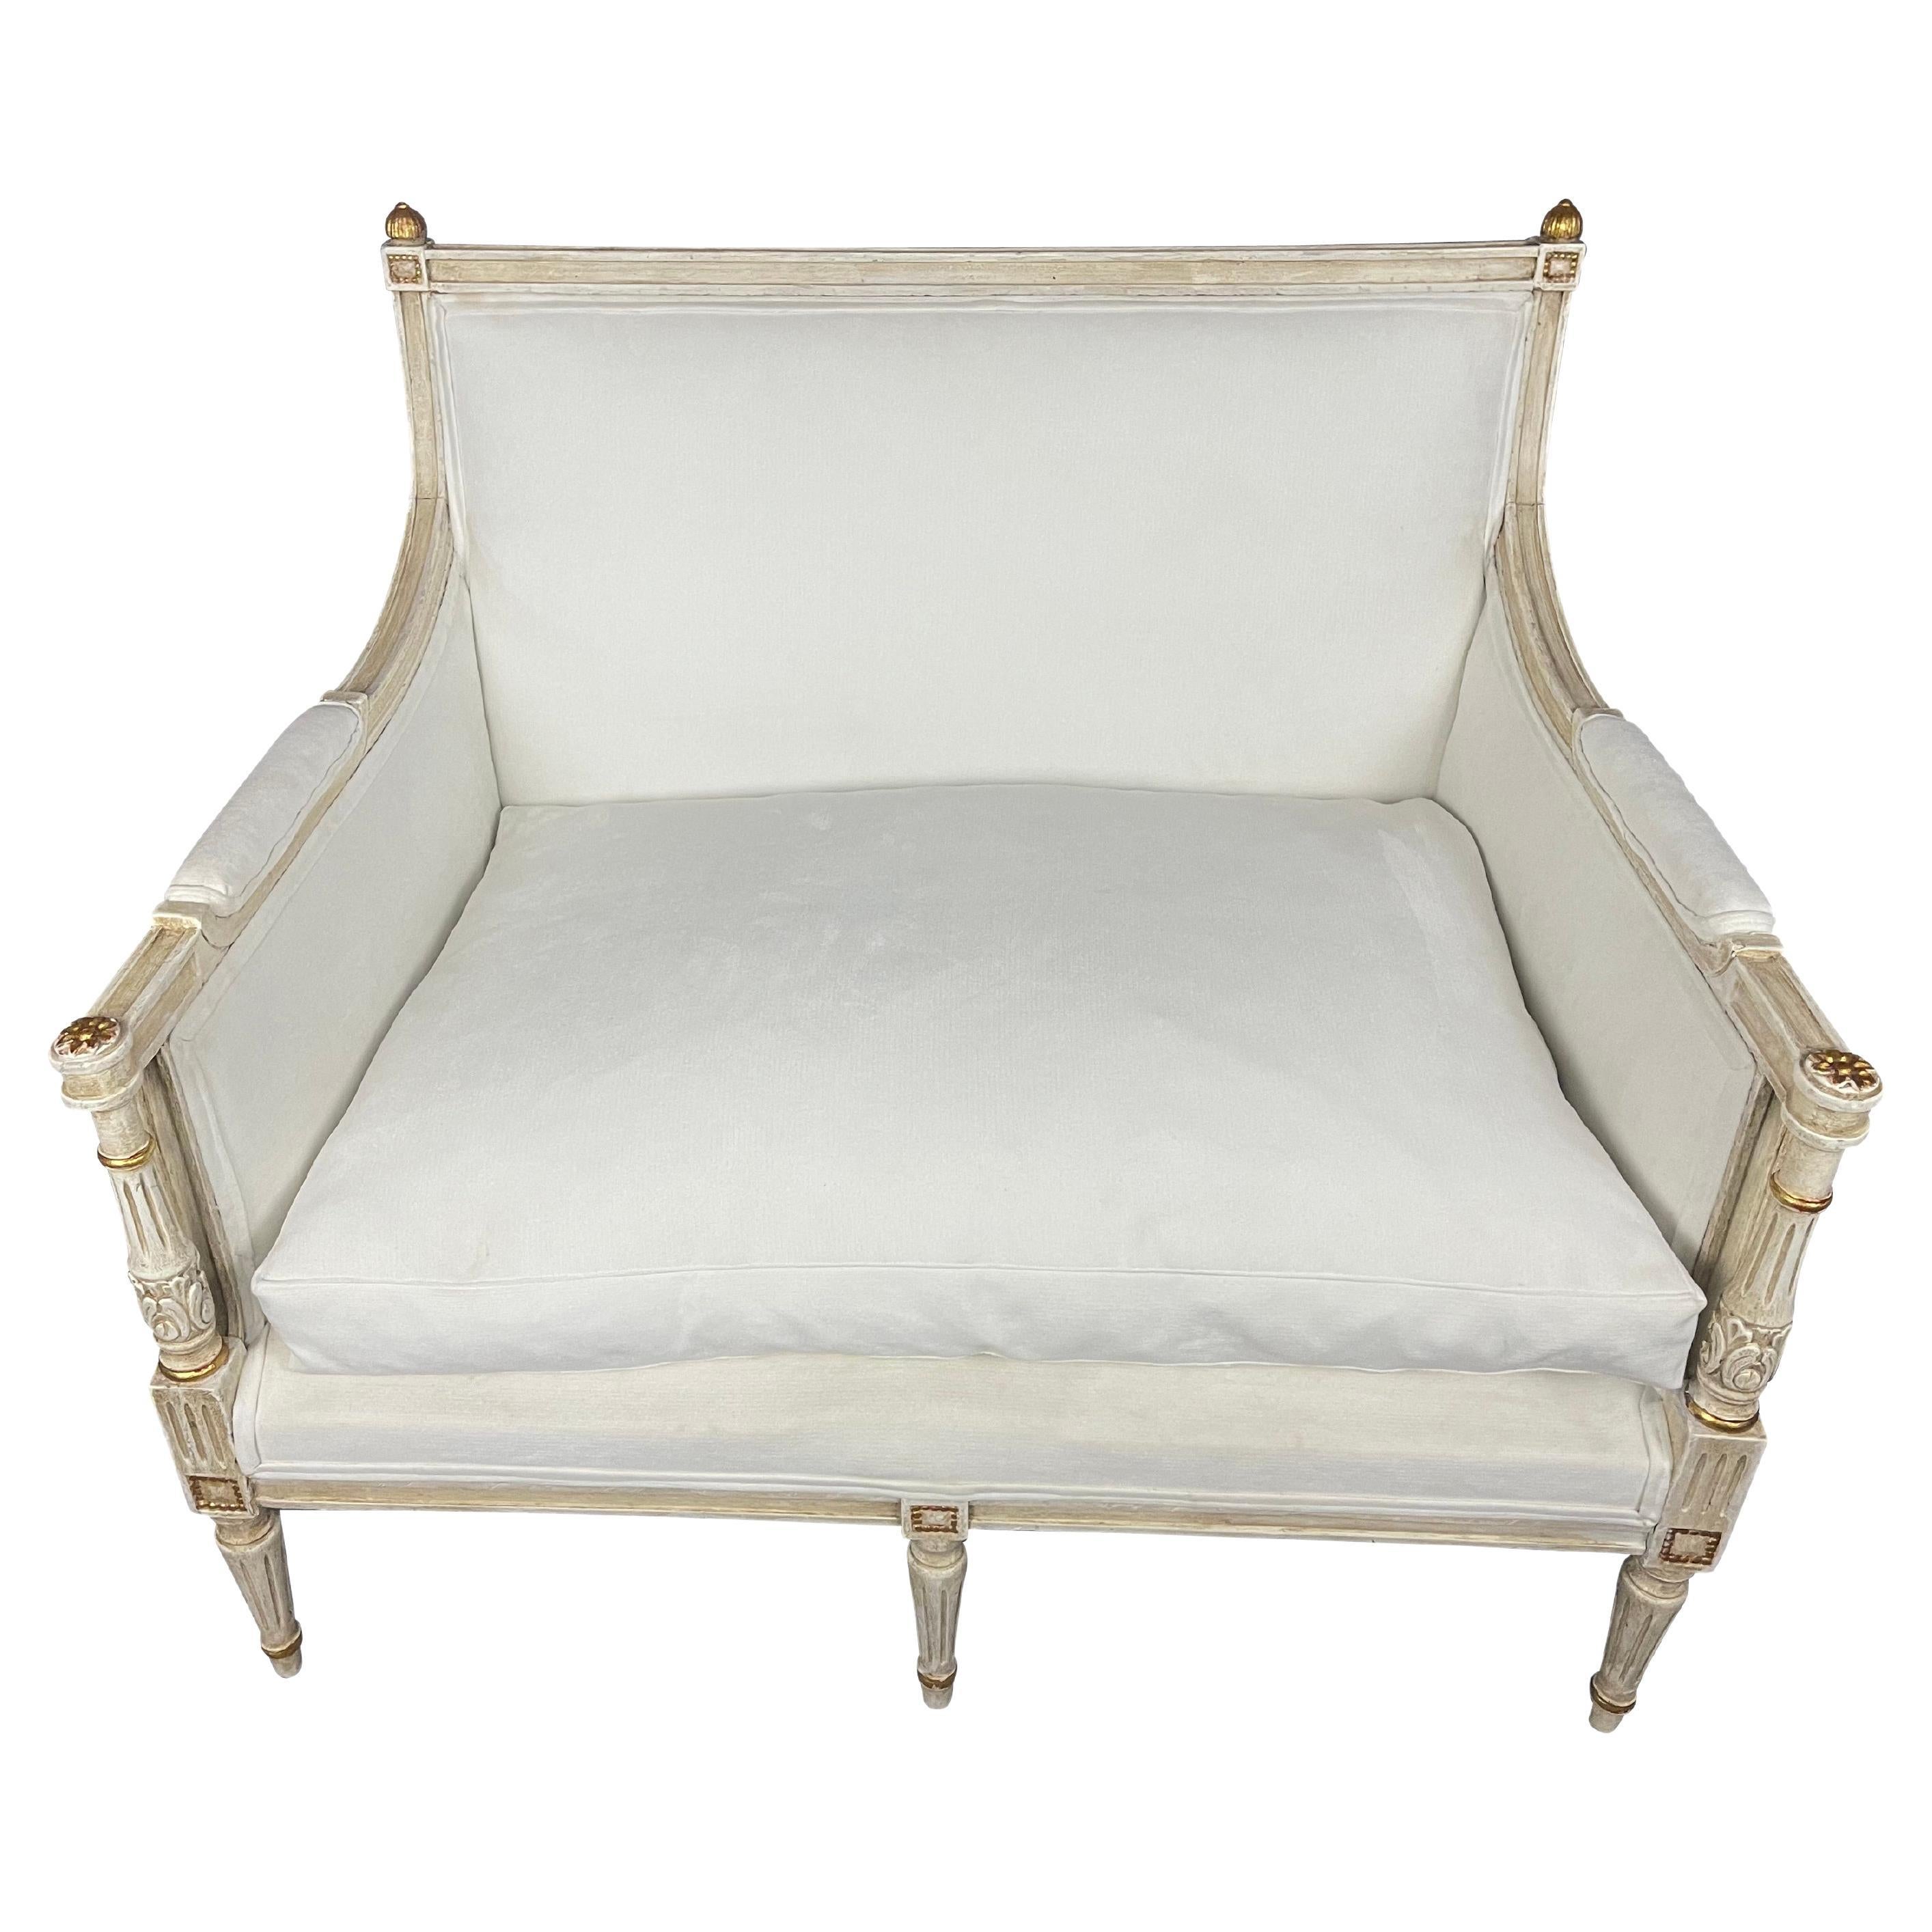 French Louis XVI Marquis Bergere Chair in White Linen